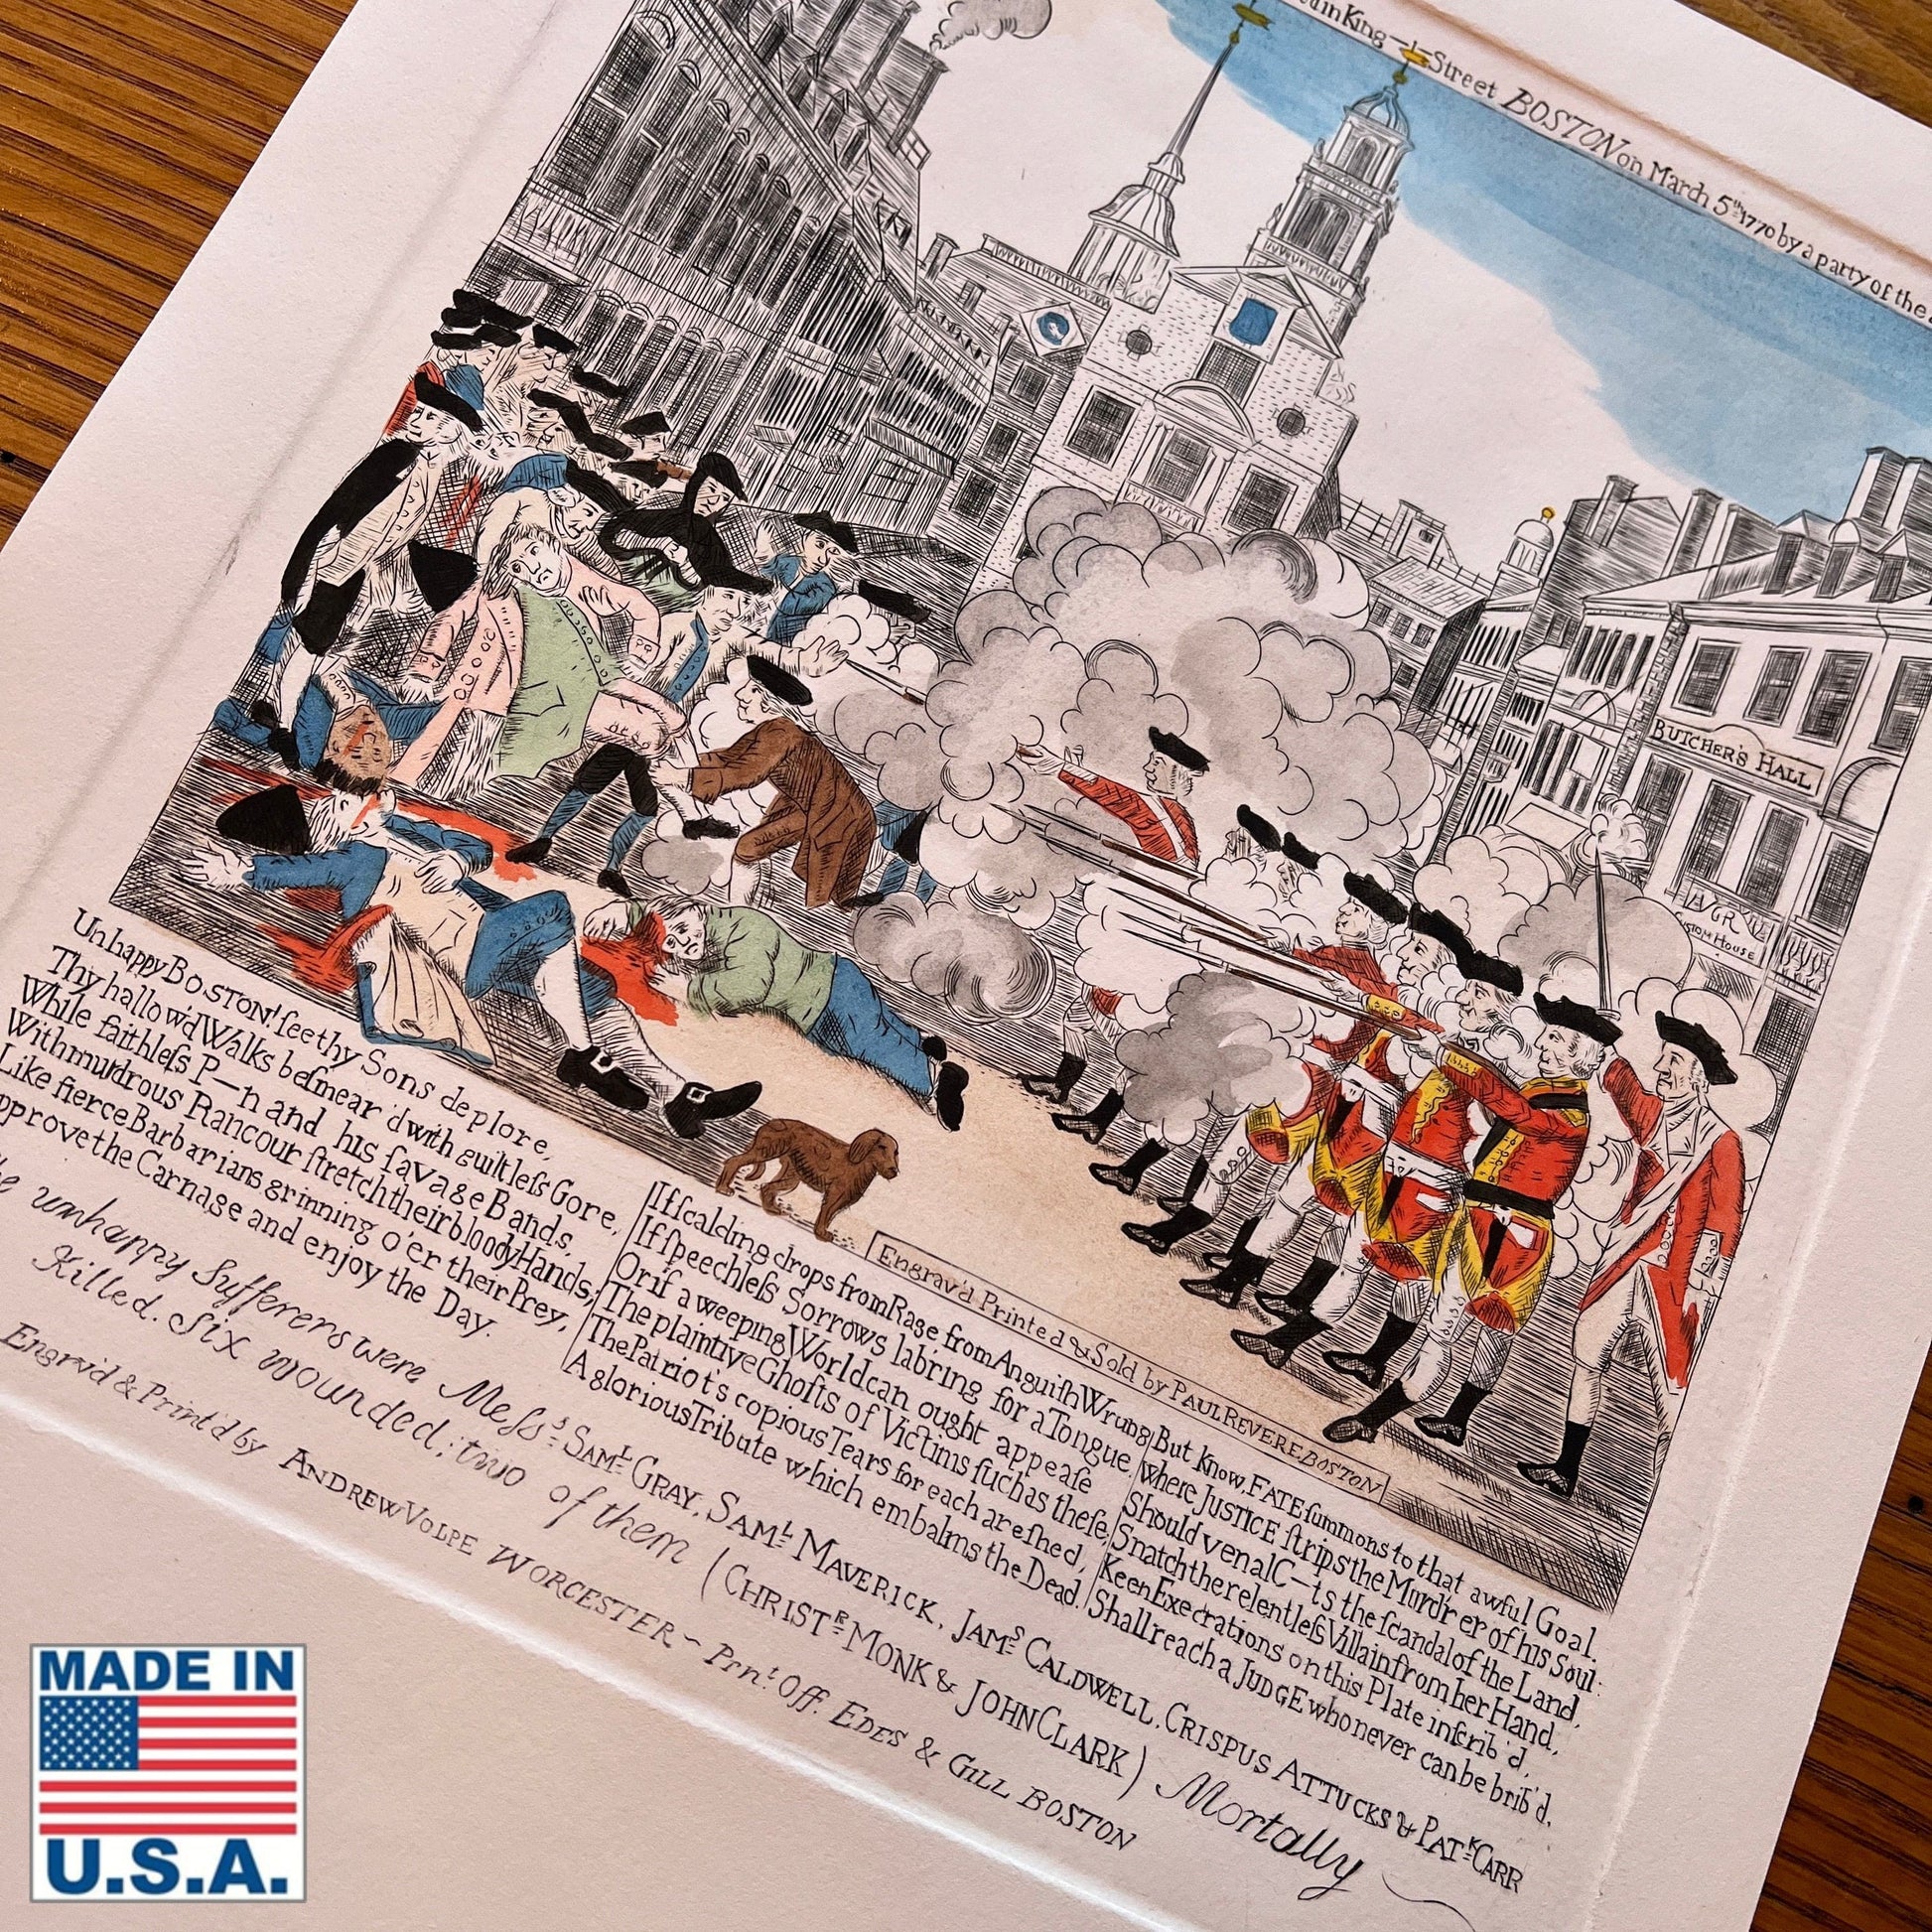 Boston Massacre Hand-Engraved print, after Revere from The History List Store